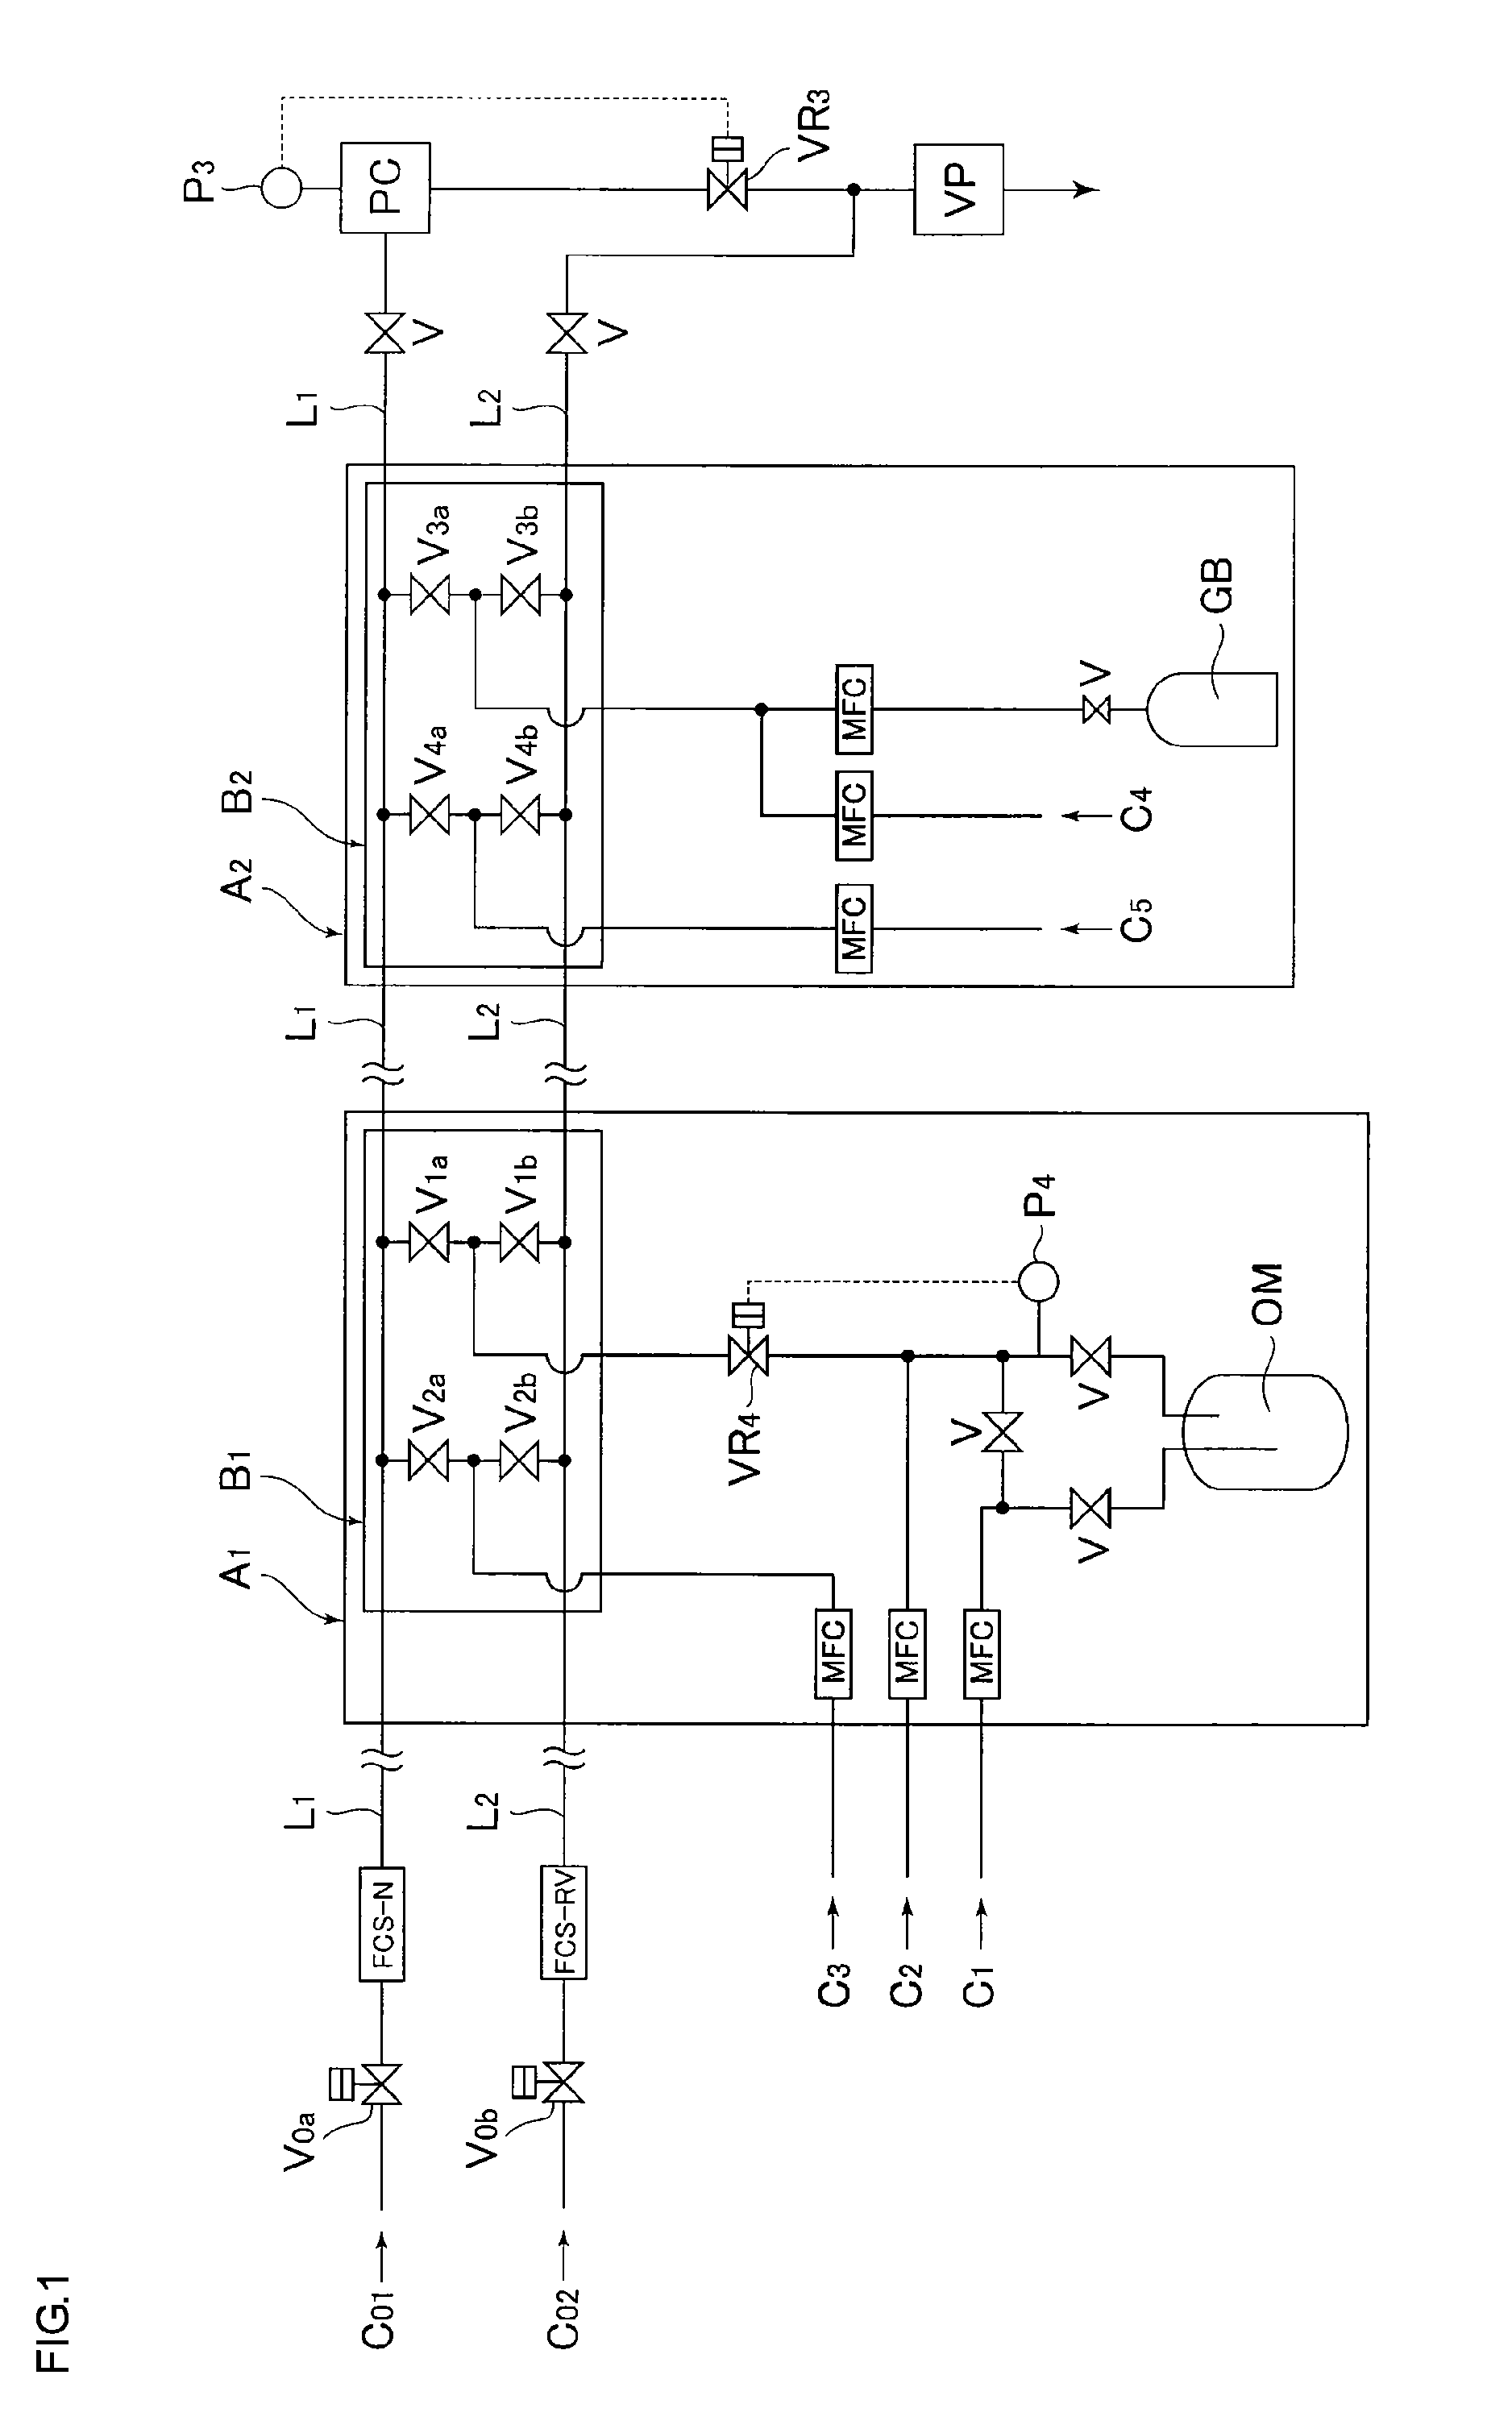 Gas supply system for semiconductor manufacturing facilities